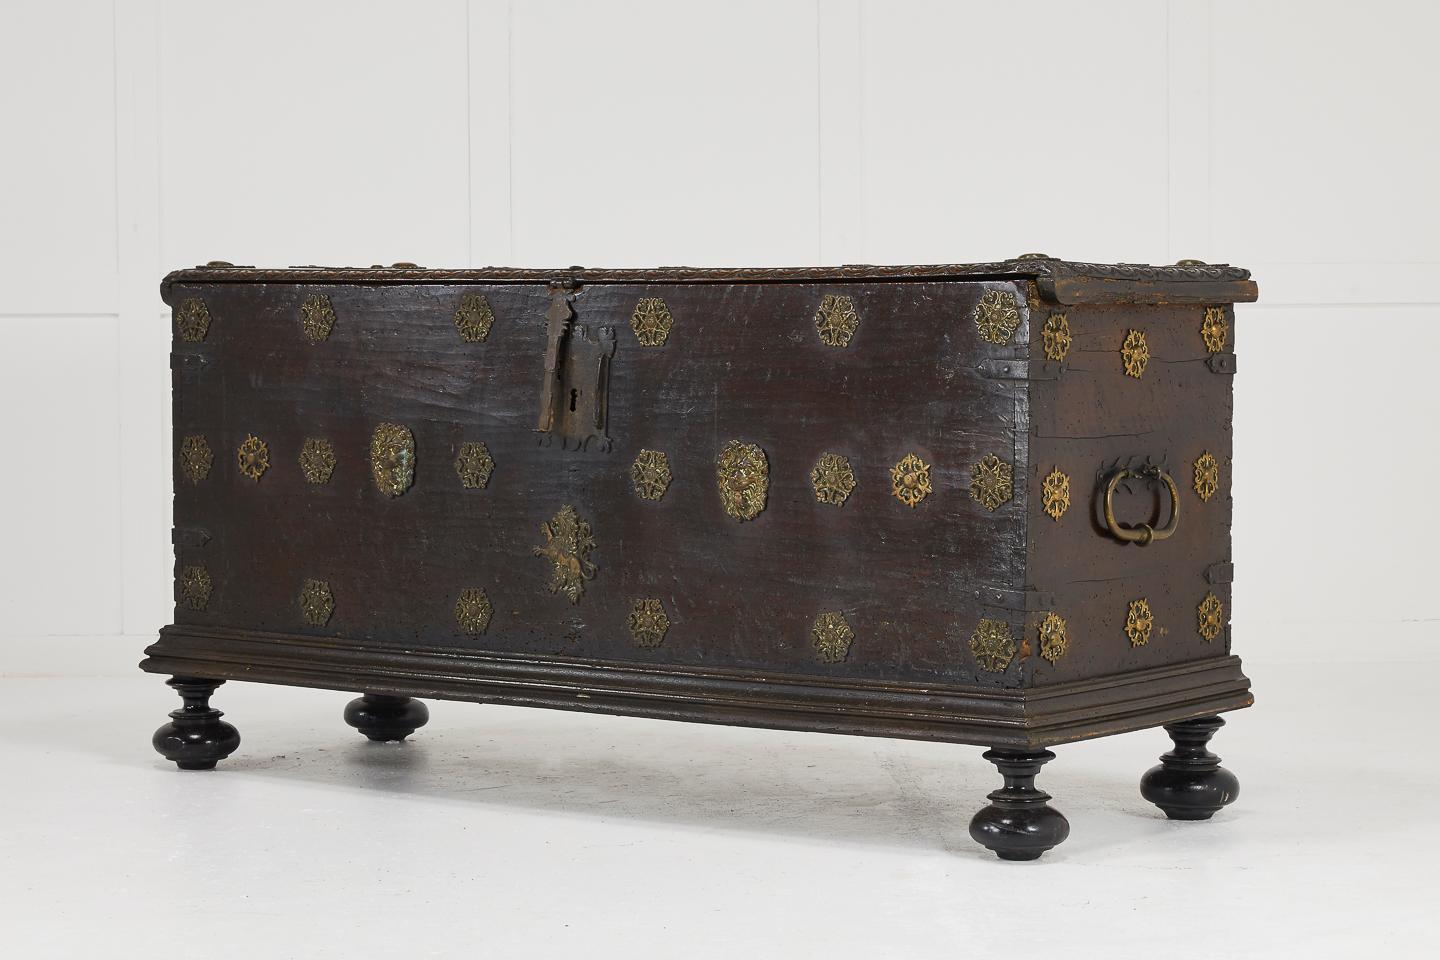 17th Century walnut Spanish trunk with great patina and fantastic applied brass-work.

Dimensions:
H 27¾